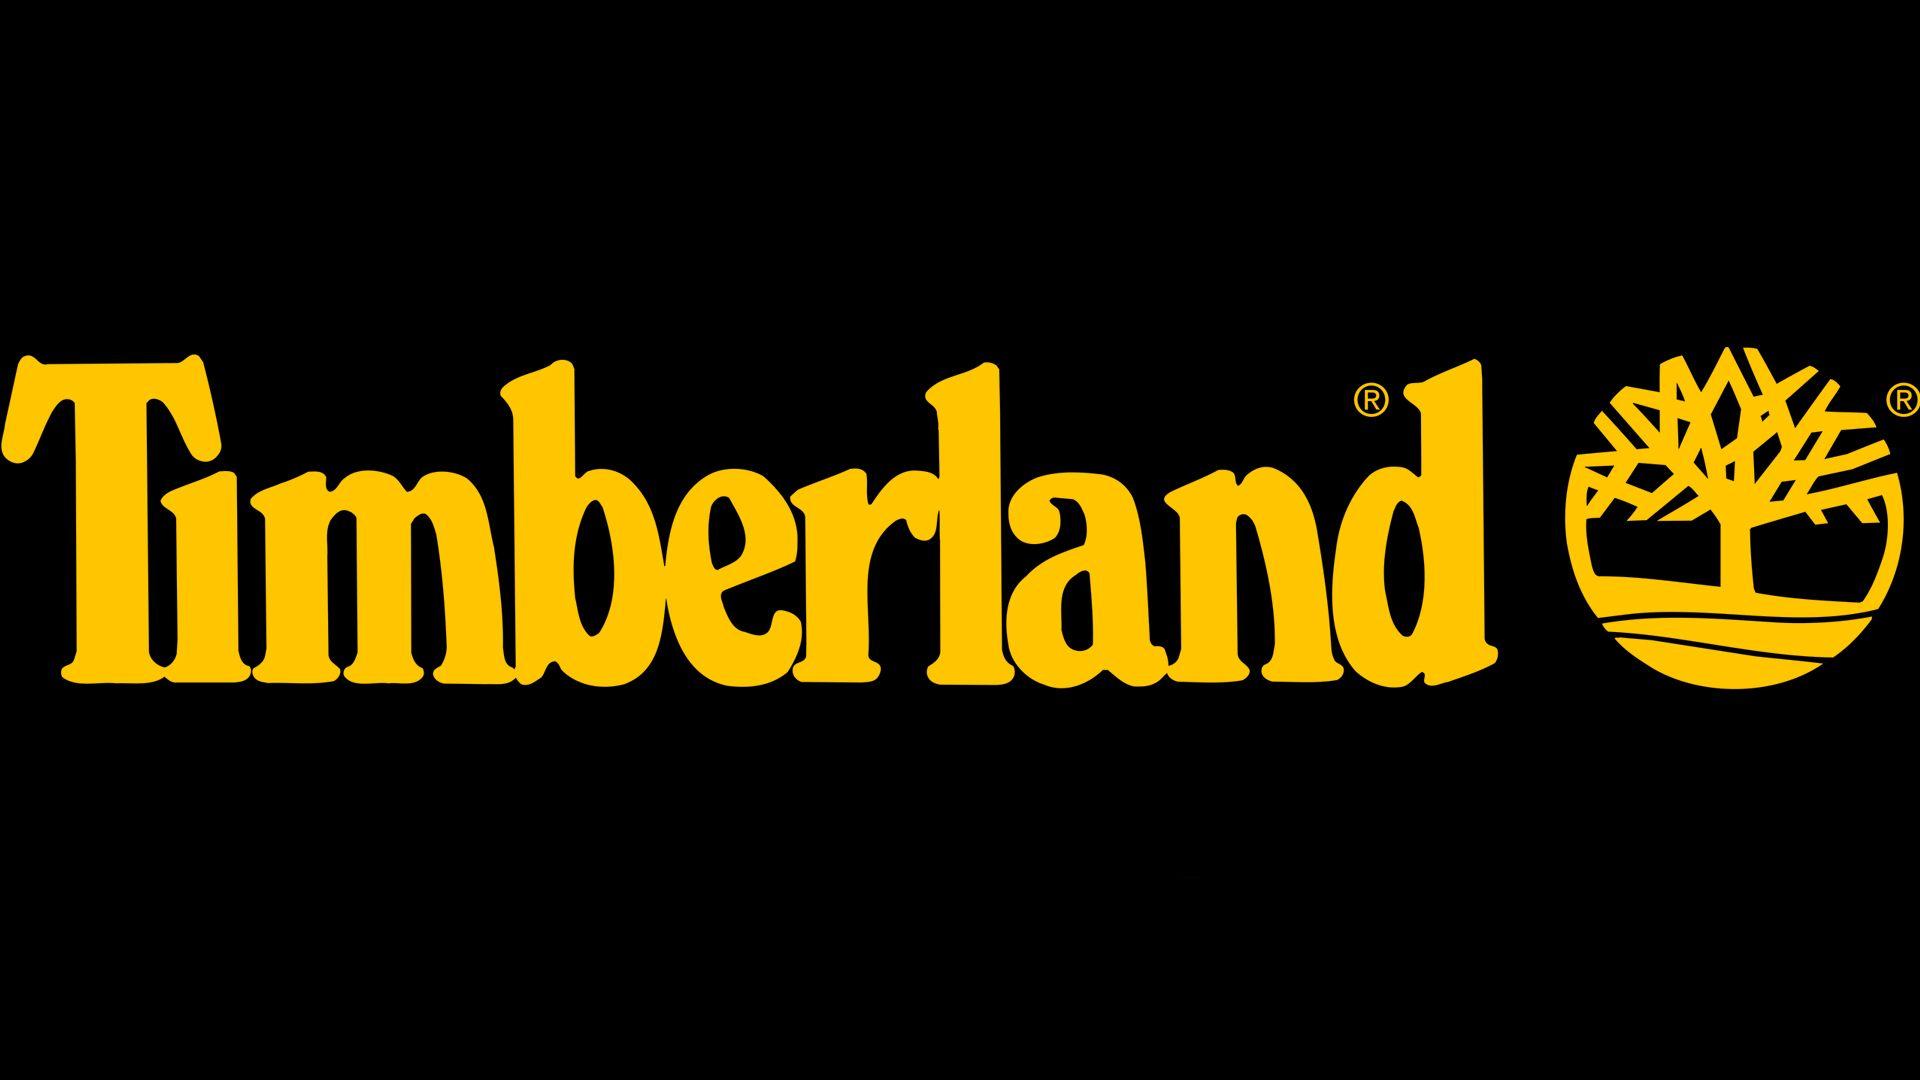 Timeberland Logo - Meaning Timberland logo and symbol. history and evolution